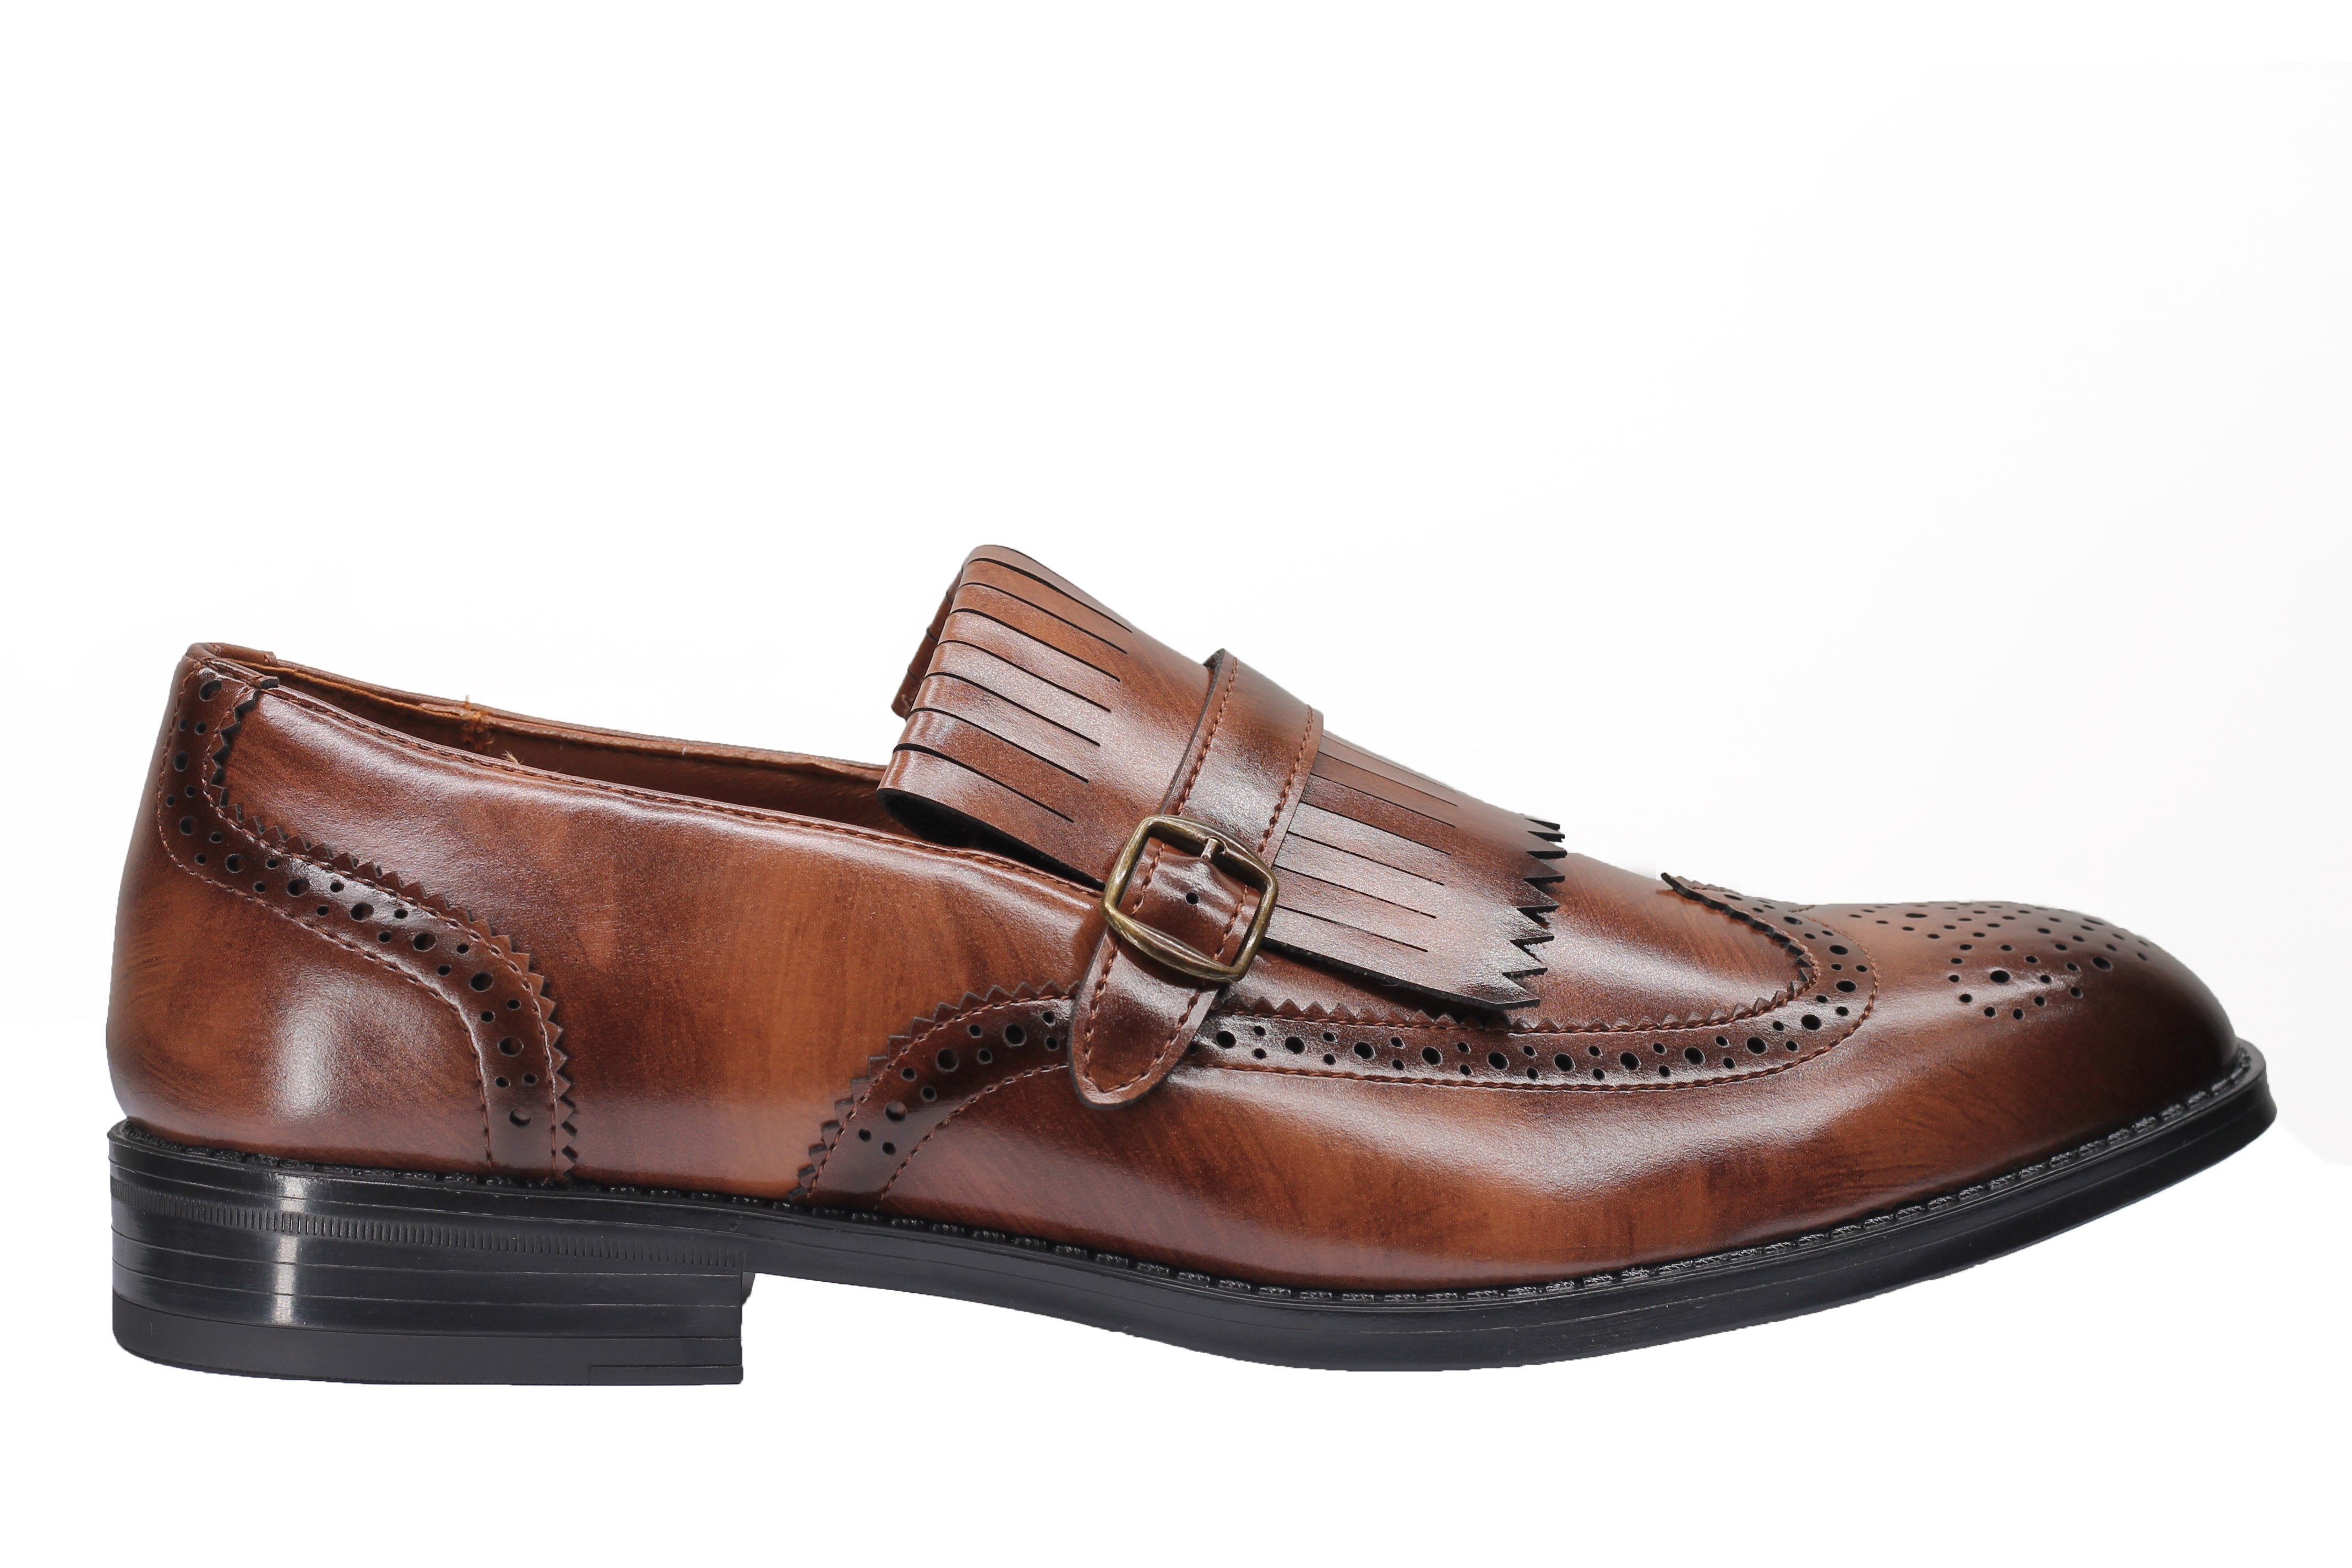 MONK STRAP BROGUE LOAFERS